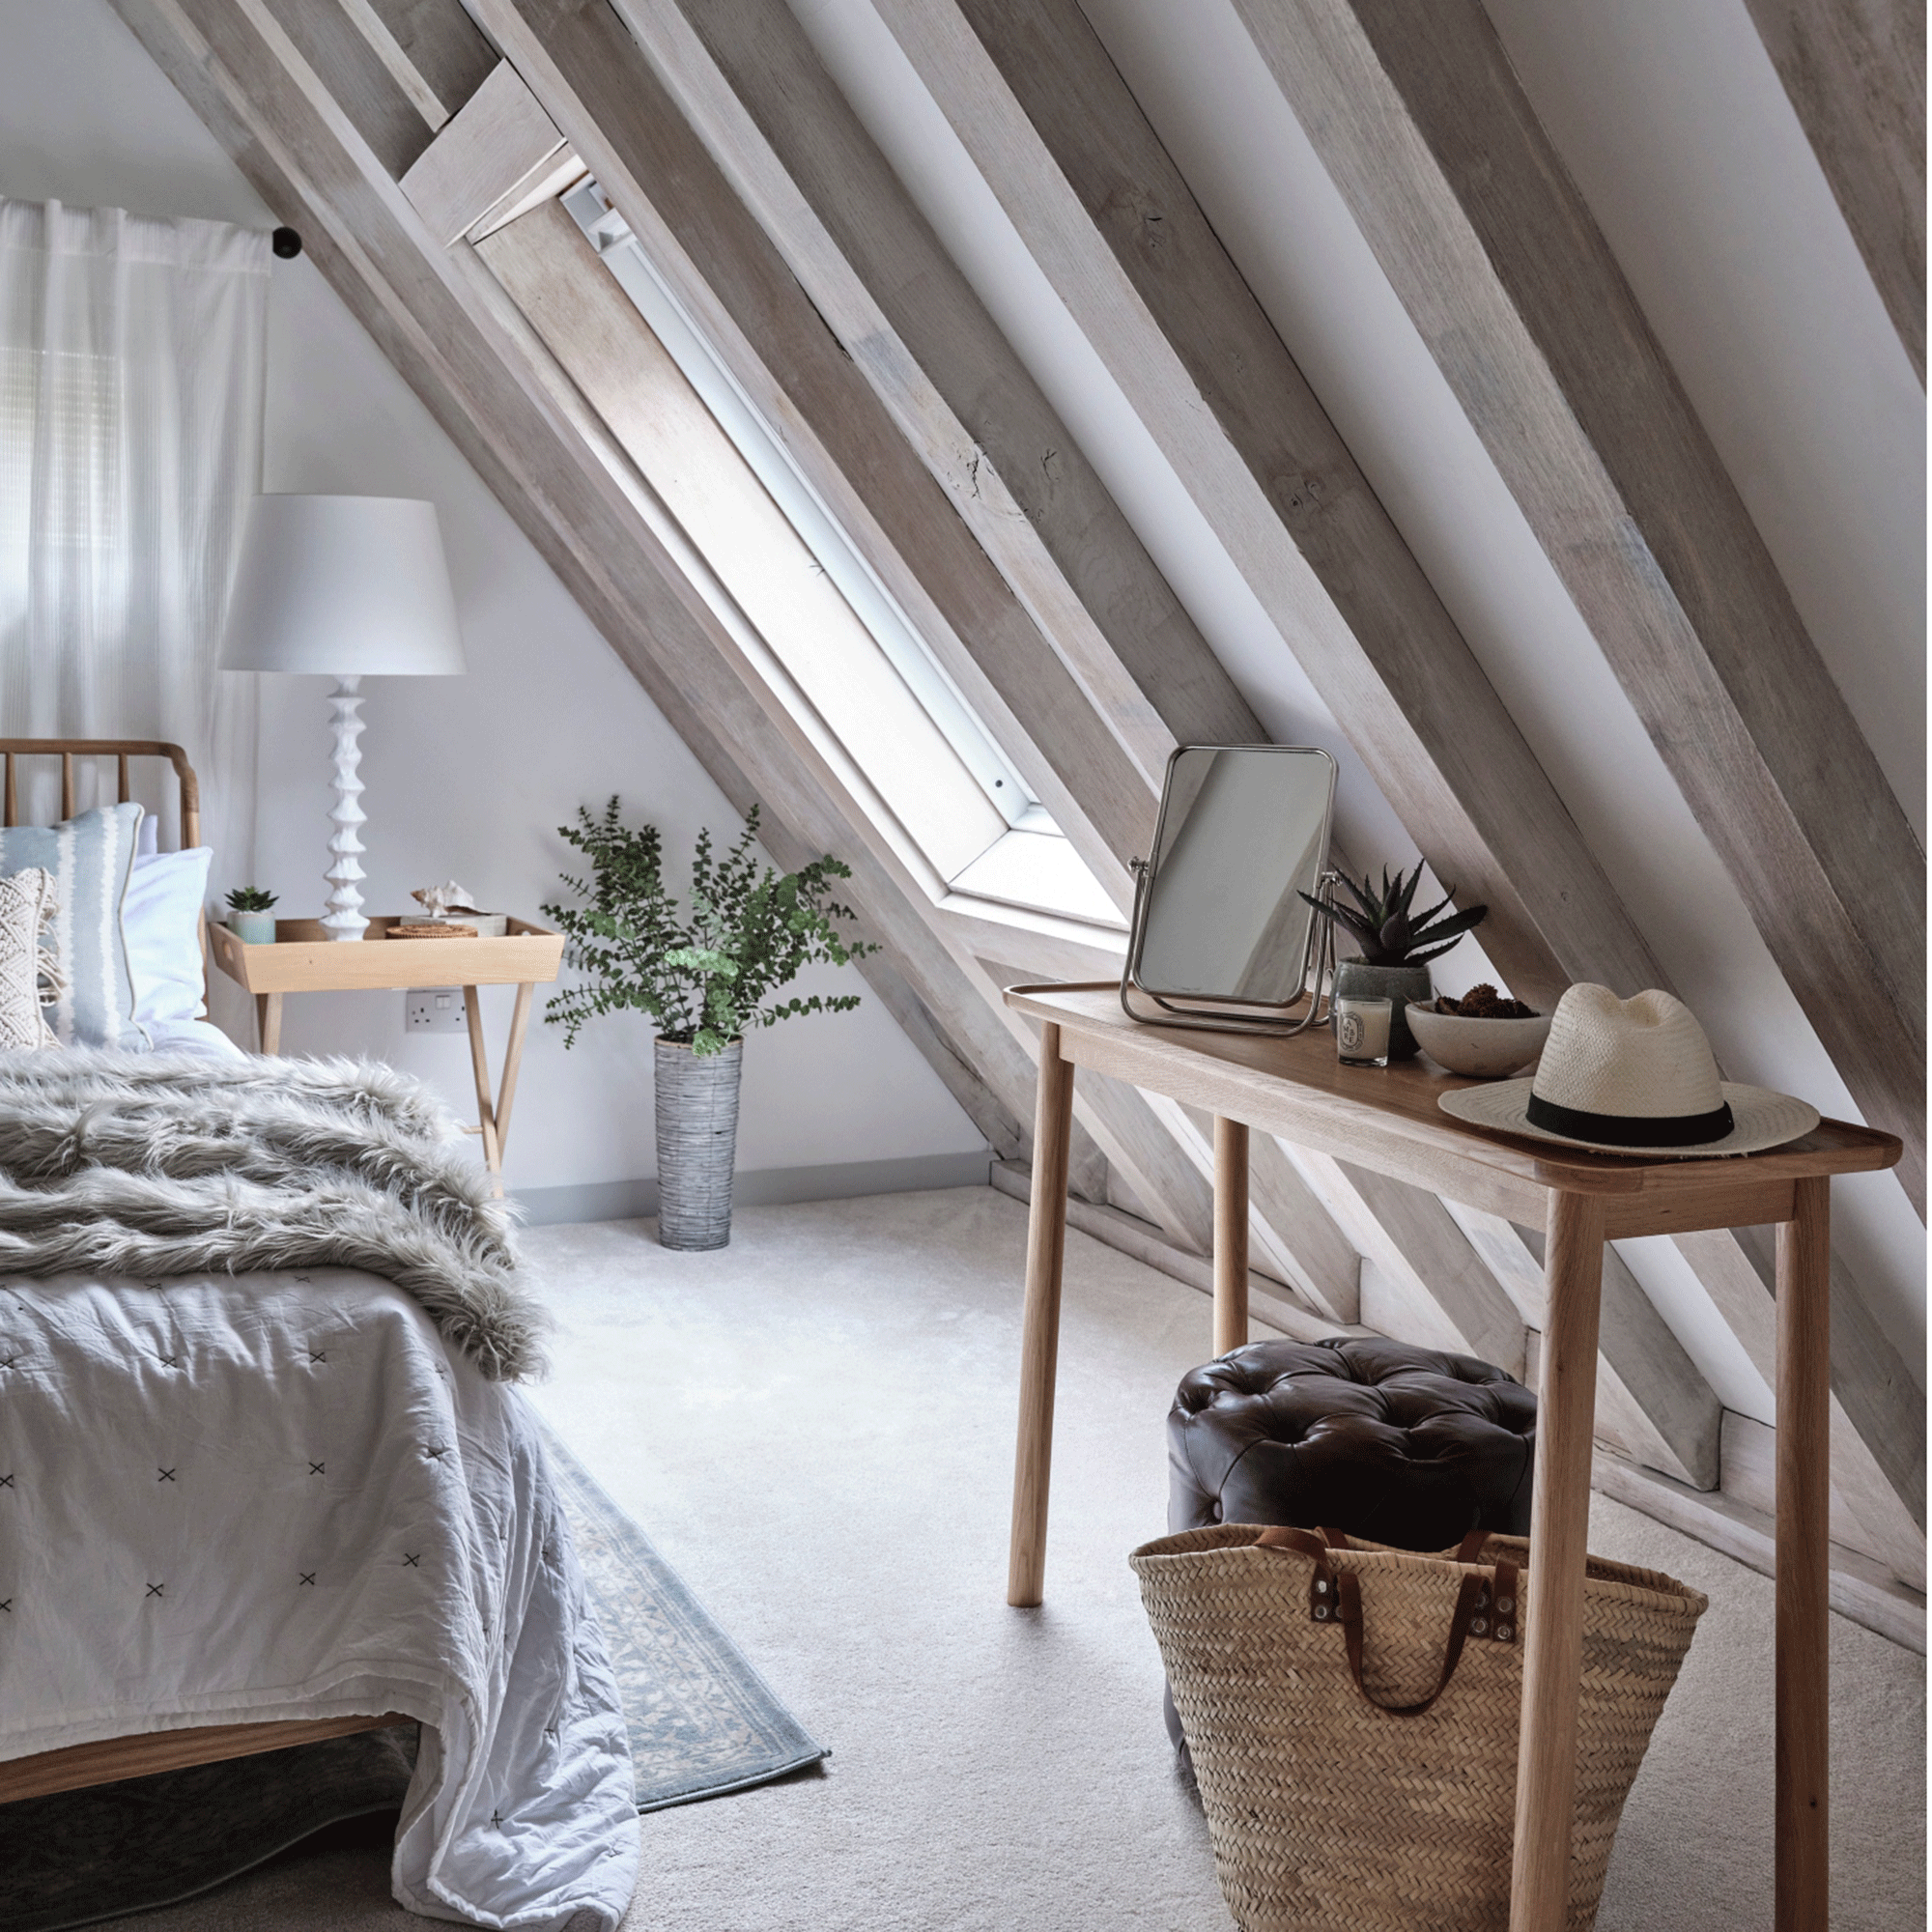 White loft conversion with bed